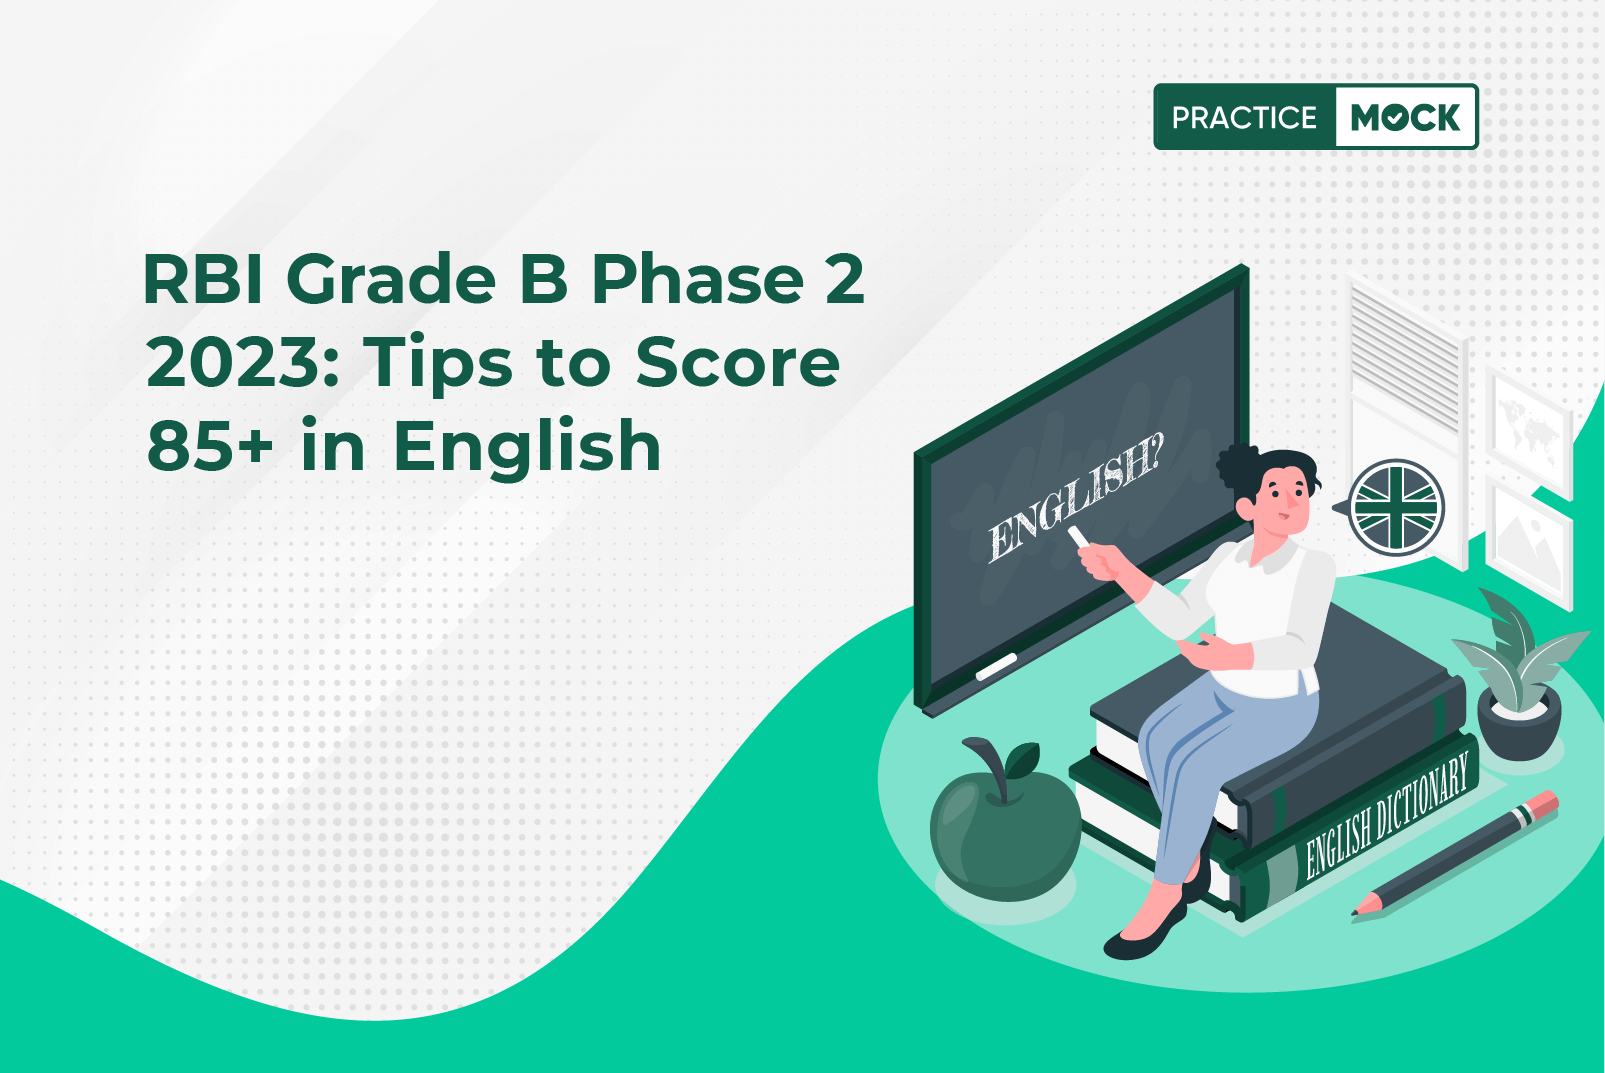 RBI Grade B Phase 2 2023 Tips to Score 85+ in English